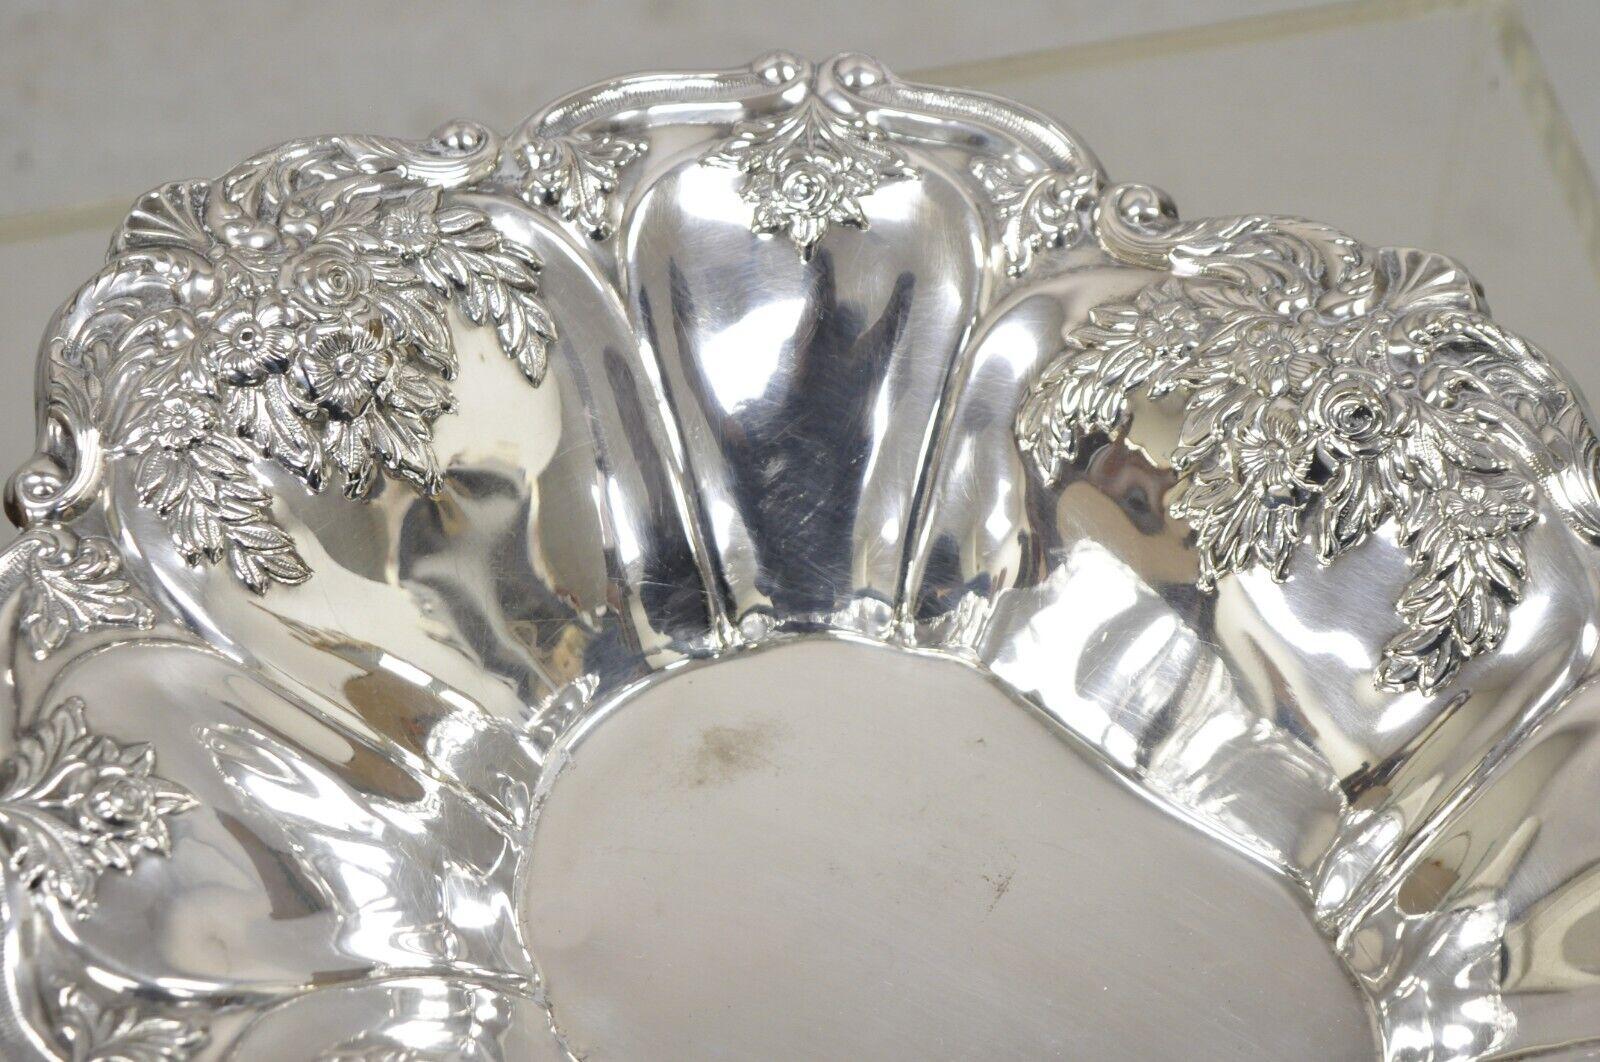 Victorian Silver Plated Floral Repousse Trinket Dish Serving Bowl Platter For Sale 7